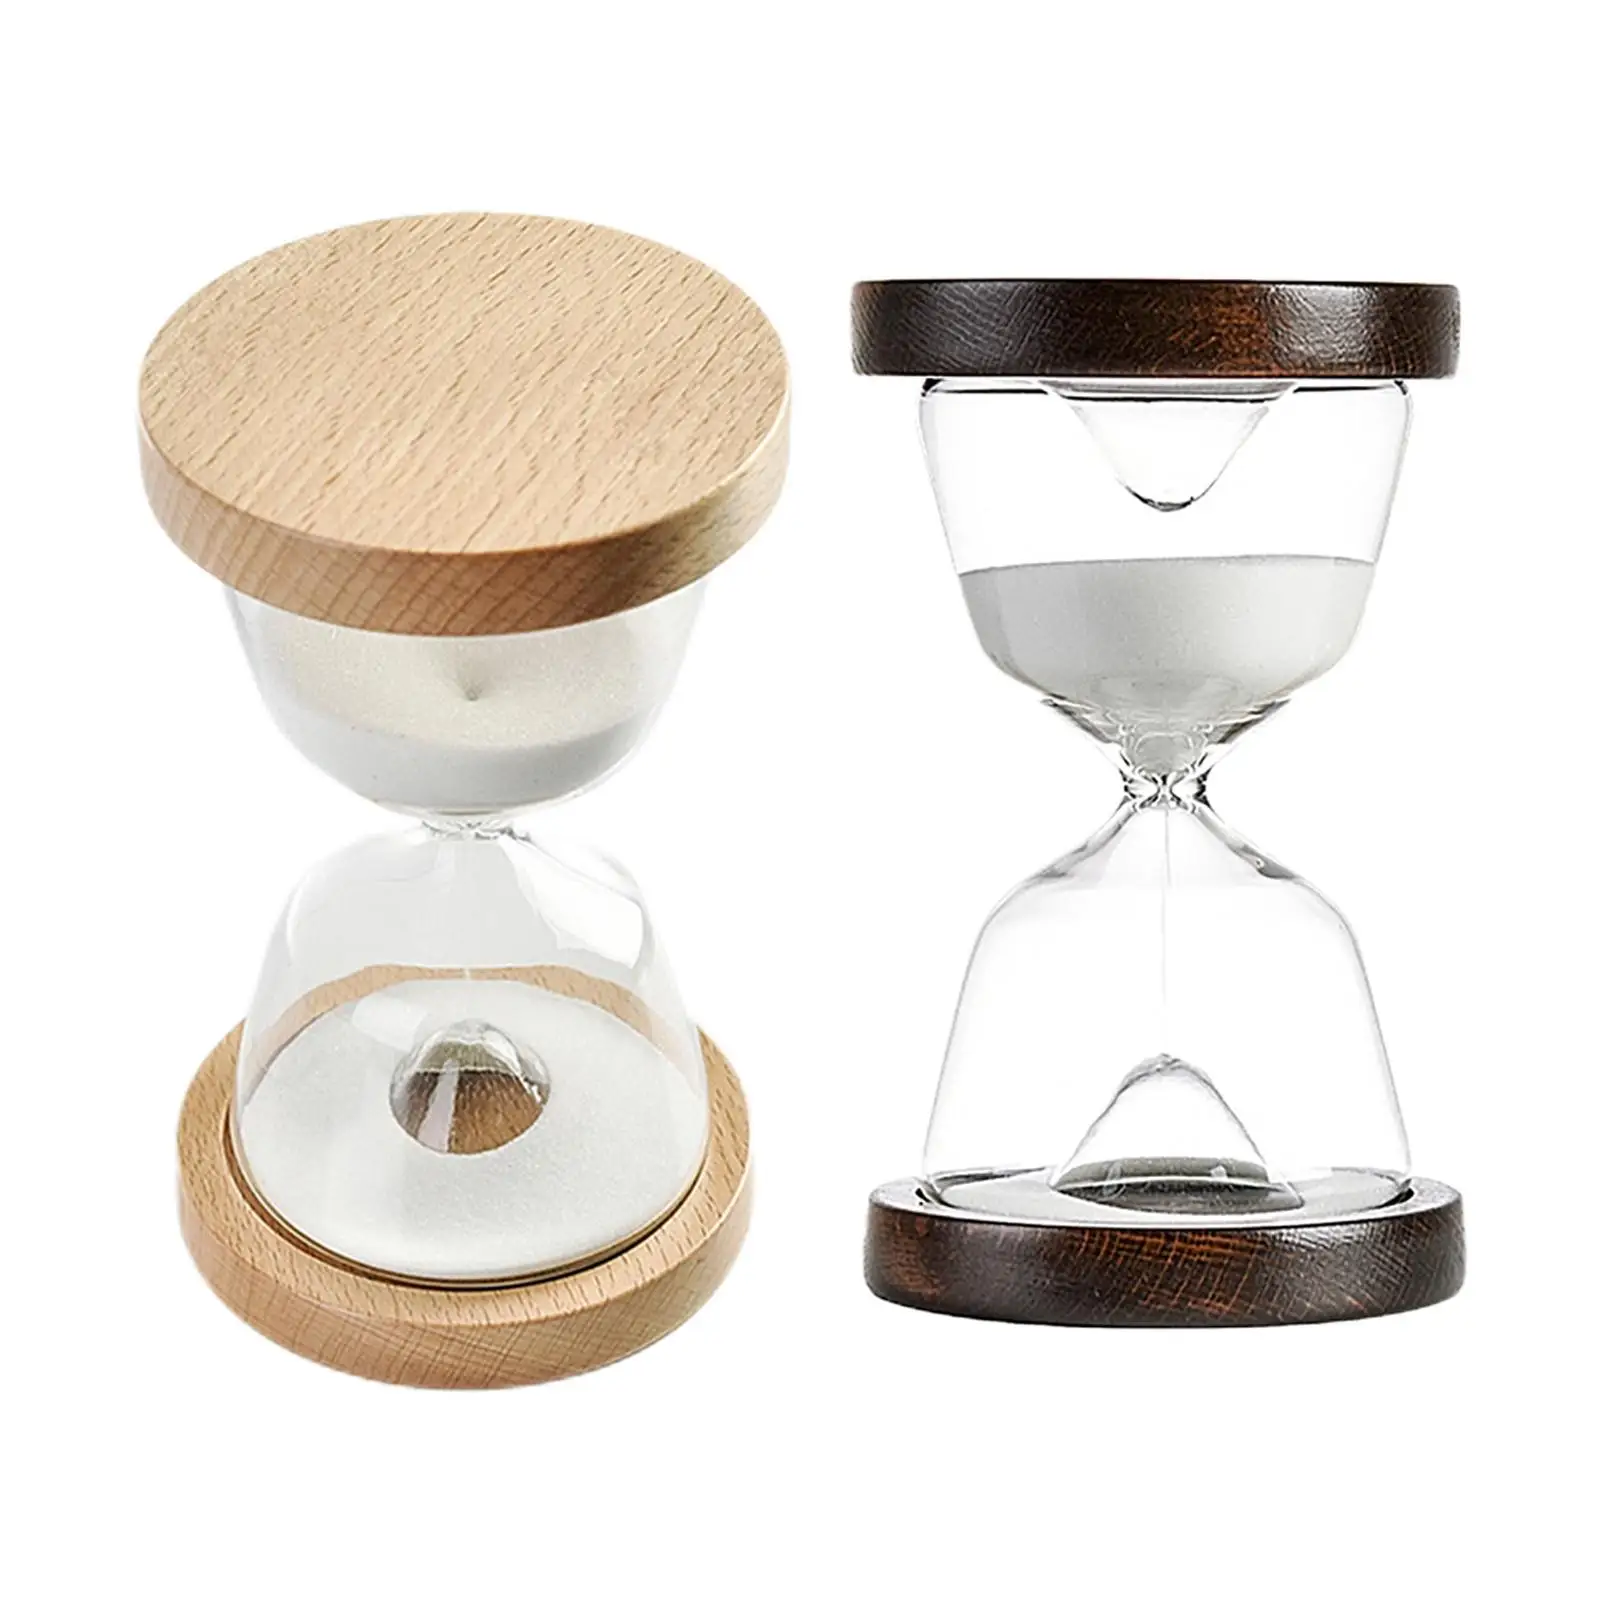 Dual Wood Base Wood Base Hour Glass Sandglass Timer 15 Min 16.5cm Height for Office Home Vintage Style Decorative White Sand